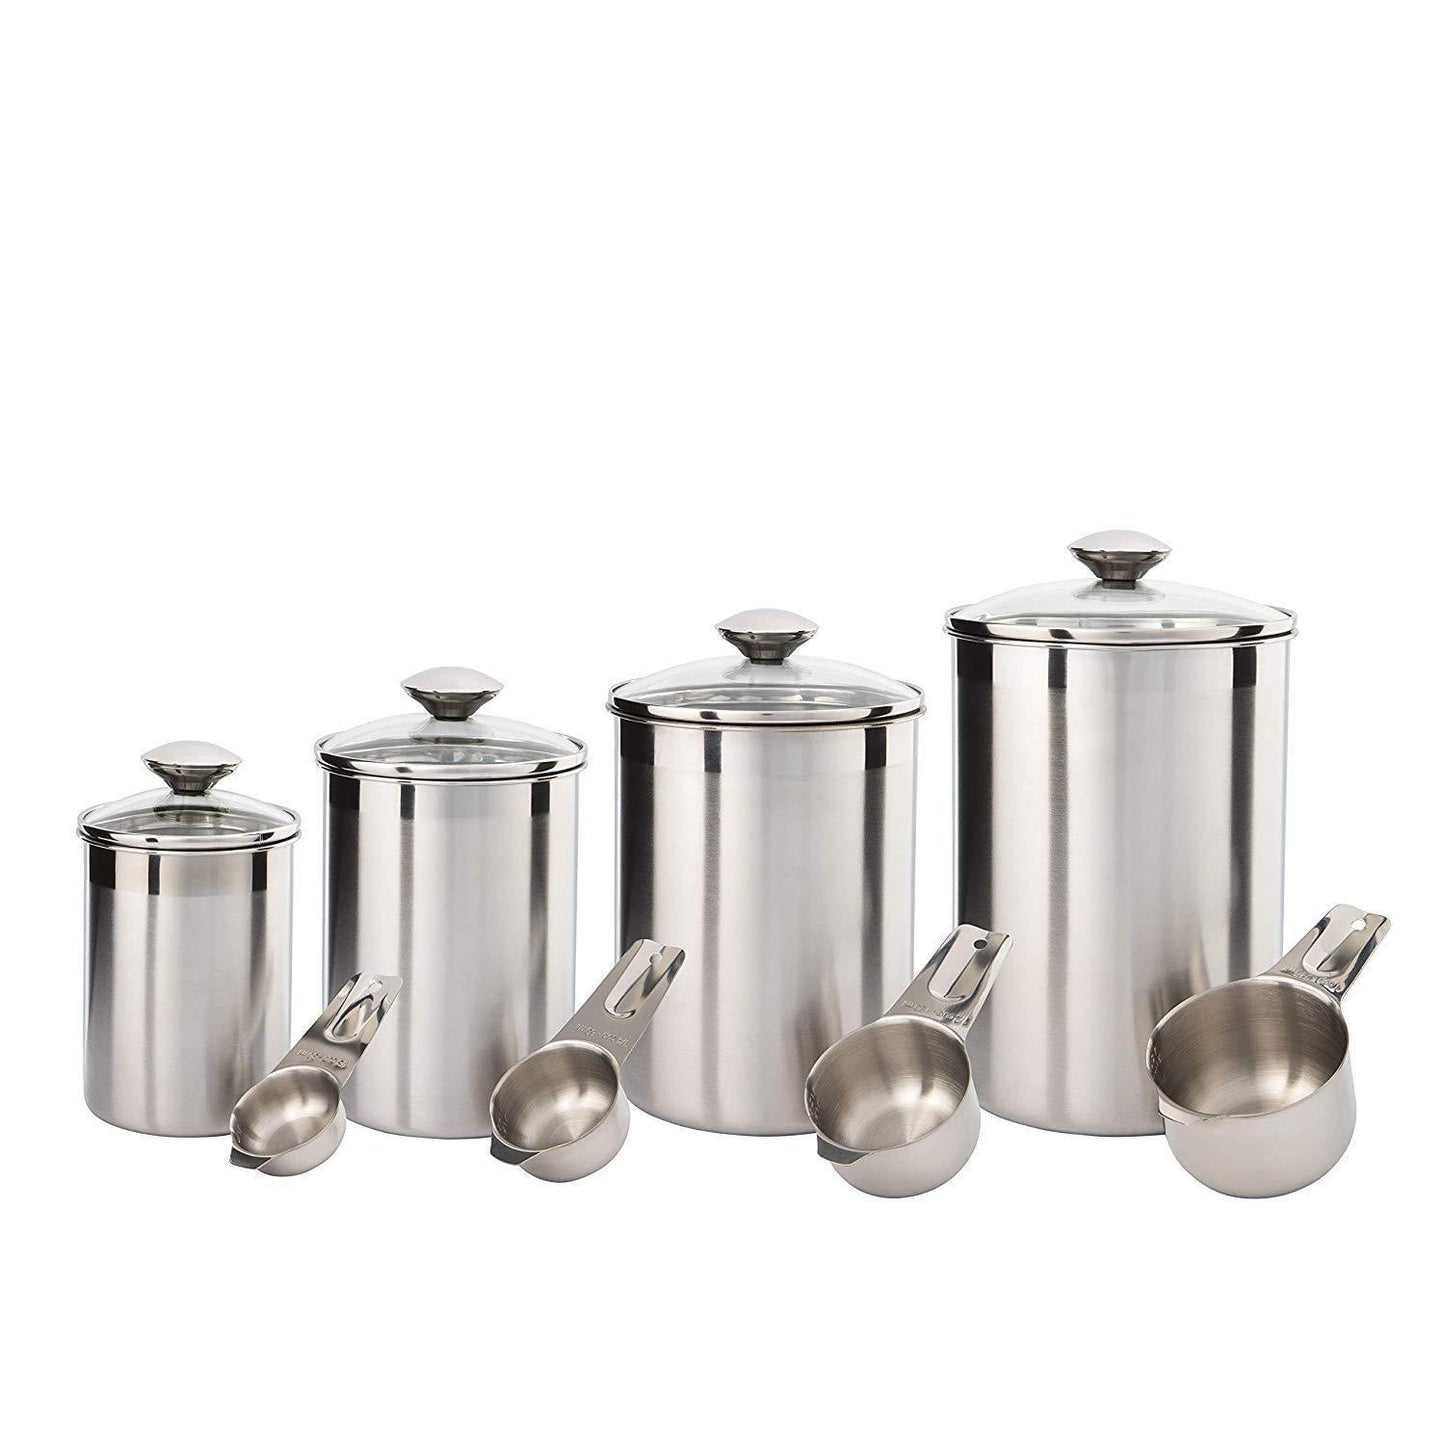 Try beautiful canisters sets for the kitchen counter 8 piece stainless steel medium sized with glass lids and measuring cups silveronyx tea coffee sugar flour canisters 8pc glass lids